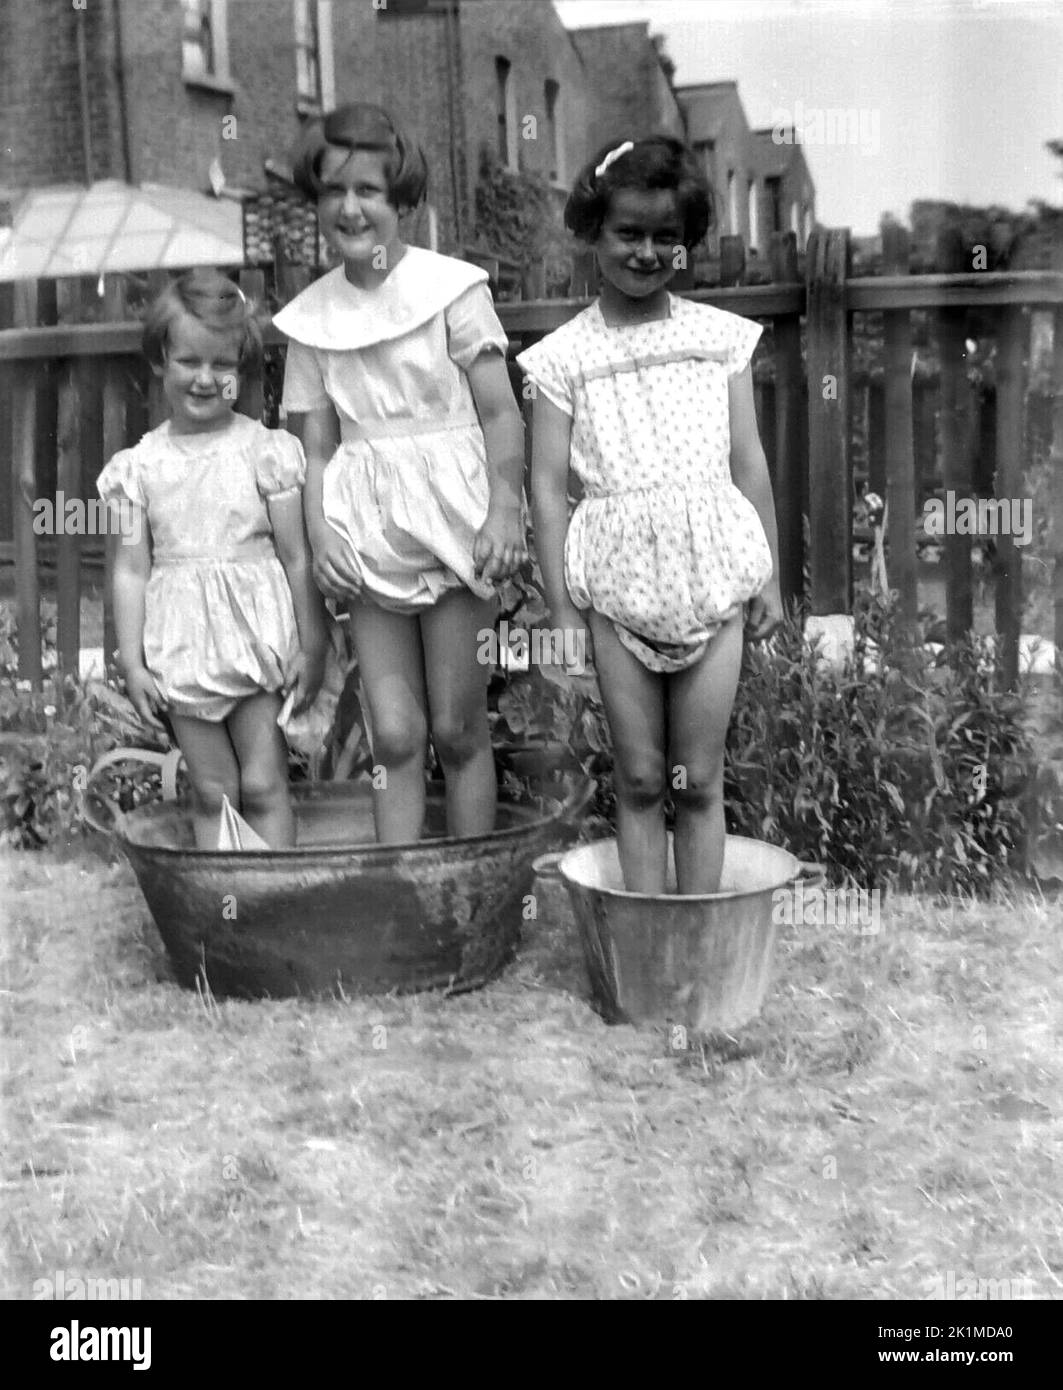 1940s, historical, three young girls, sisters standing in metal buckets outside in a back garden, England, UK. Stock Photo